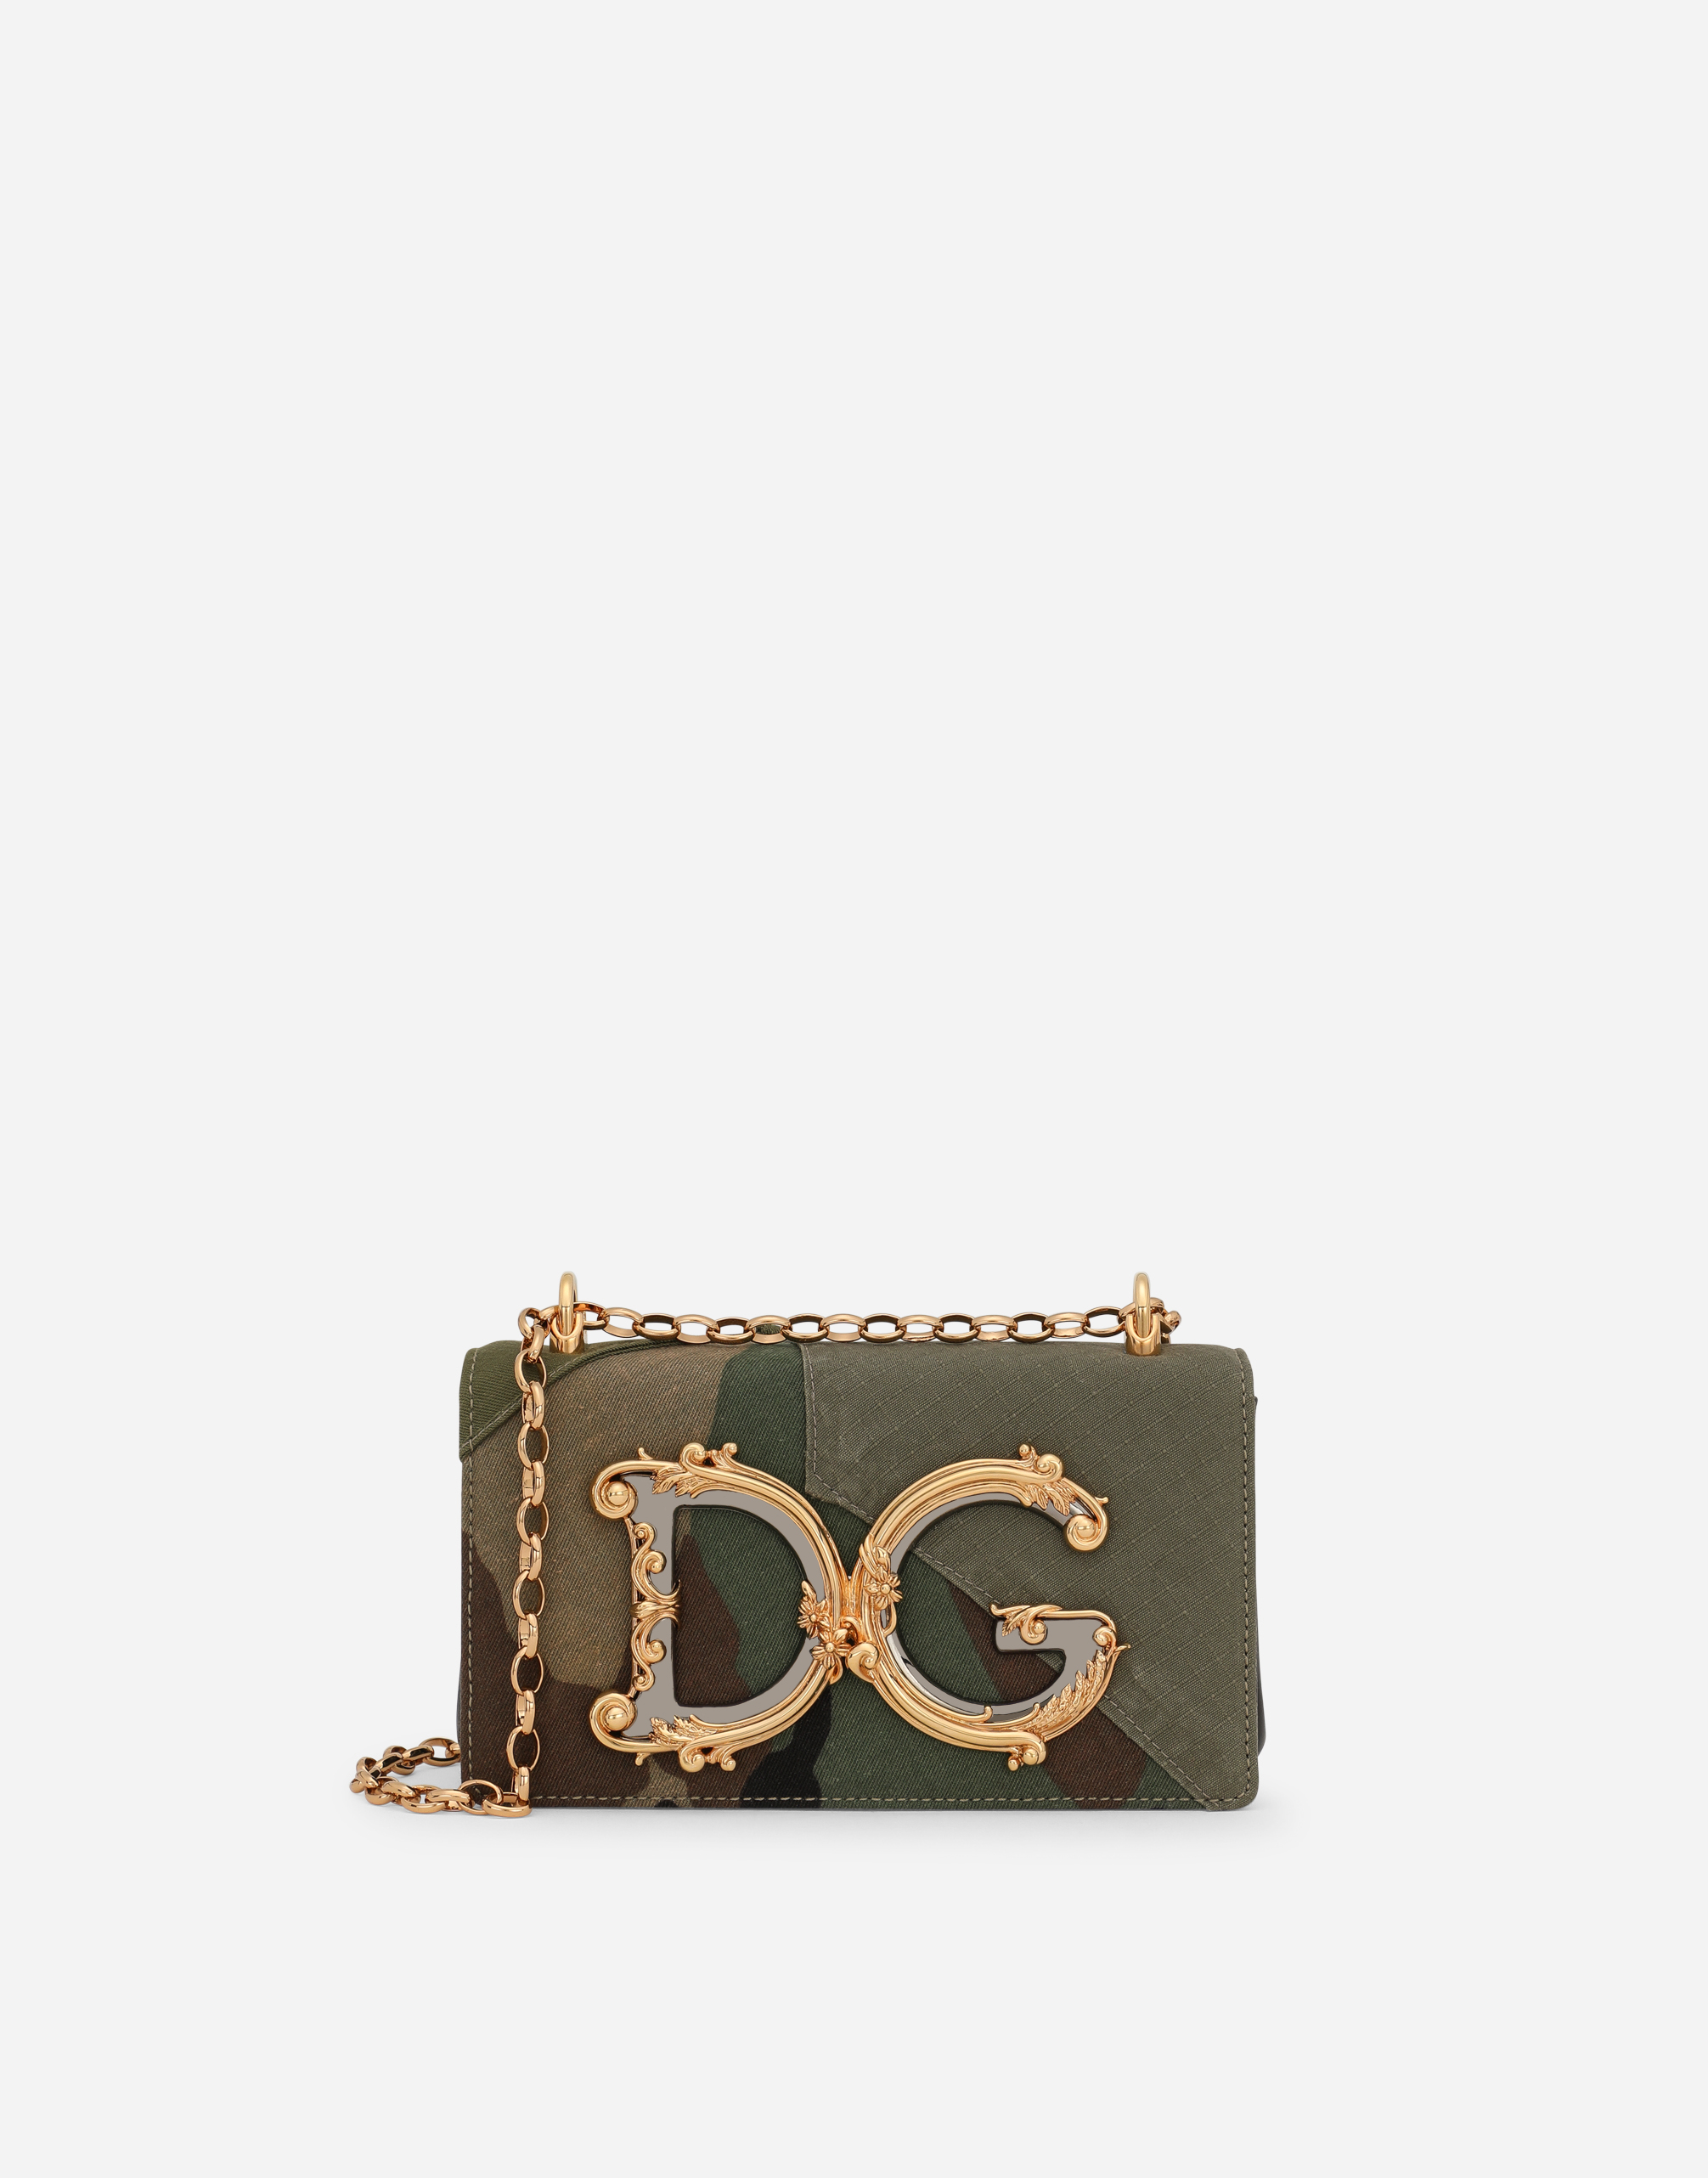 DG Girls phone bag in camouflage patchwork in Multicolor